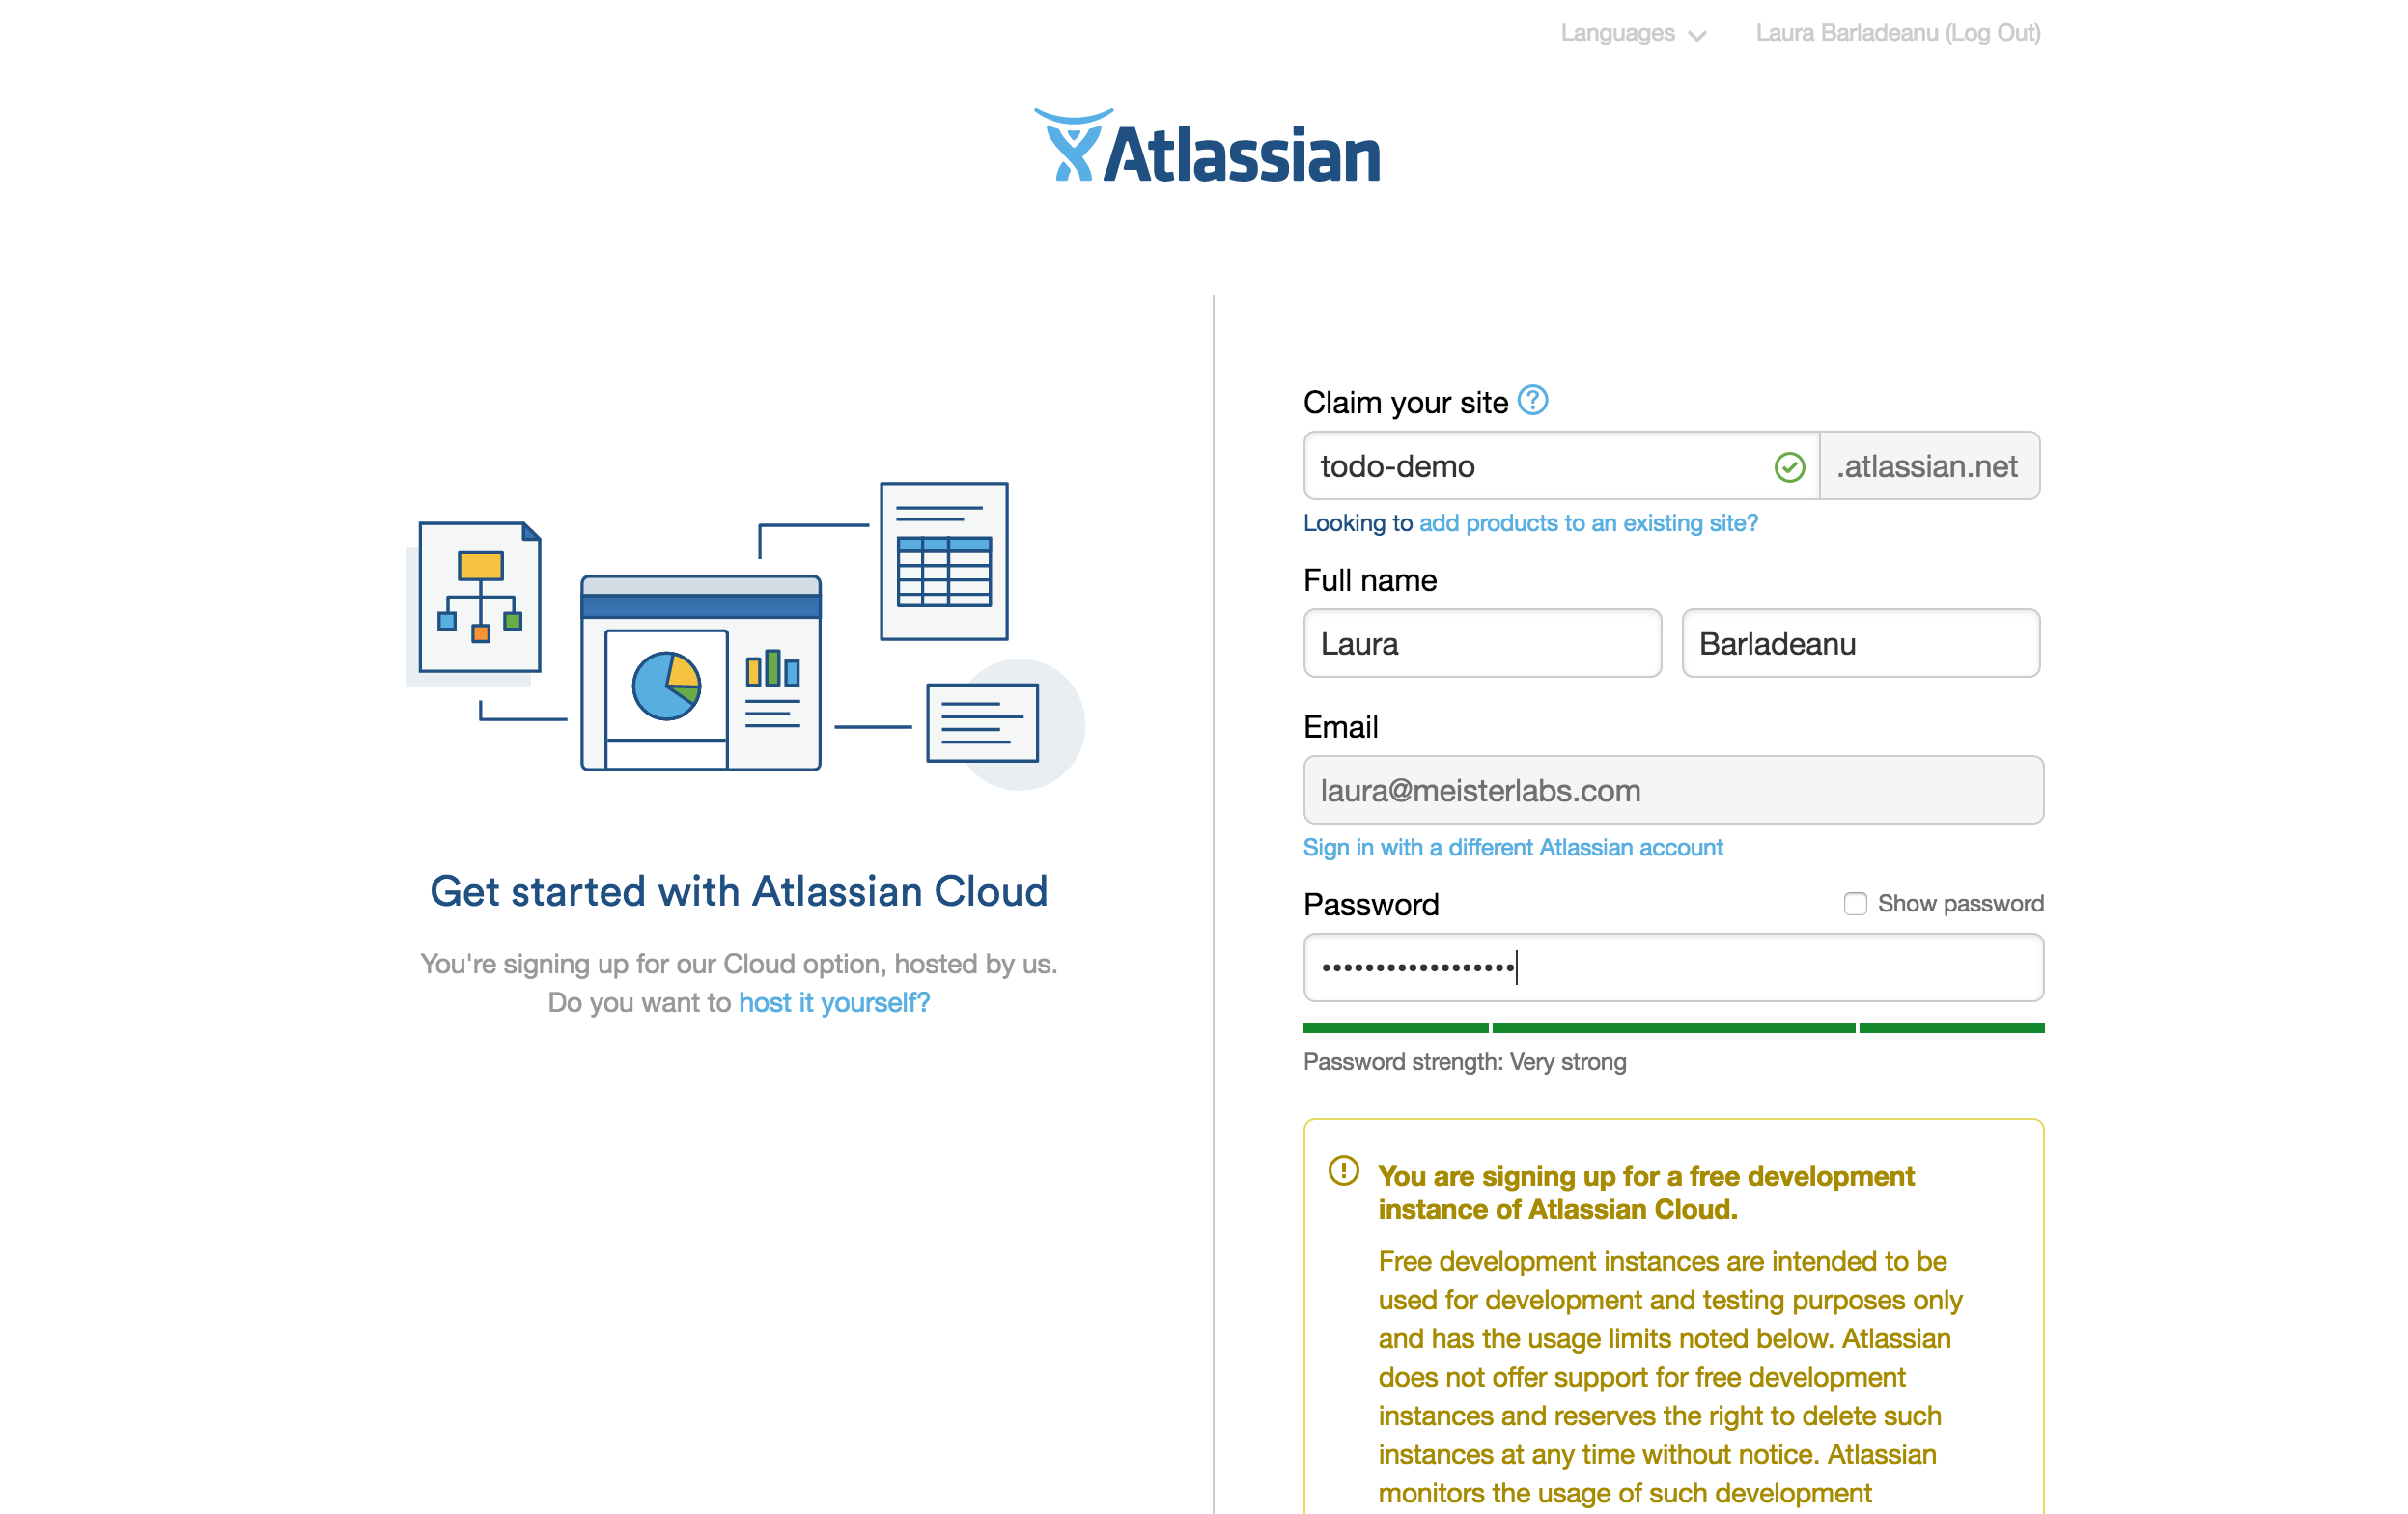 Get started with Atlassian Cloud